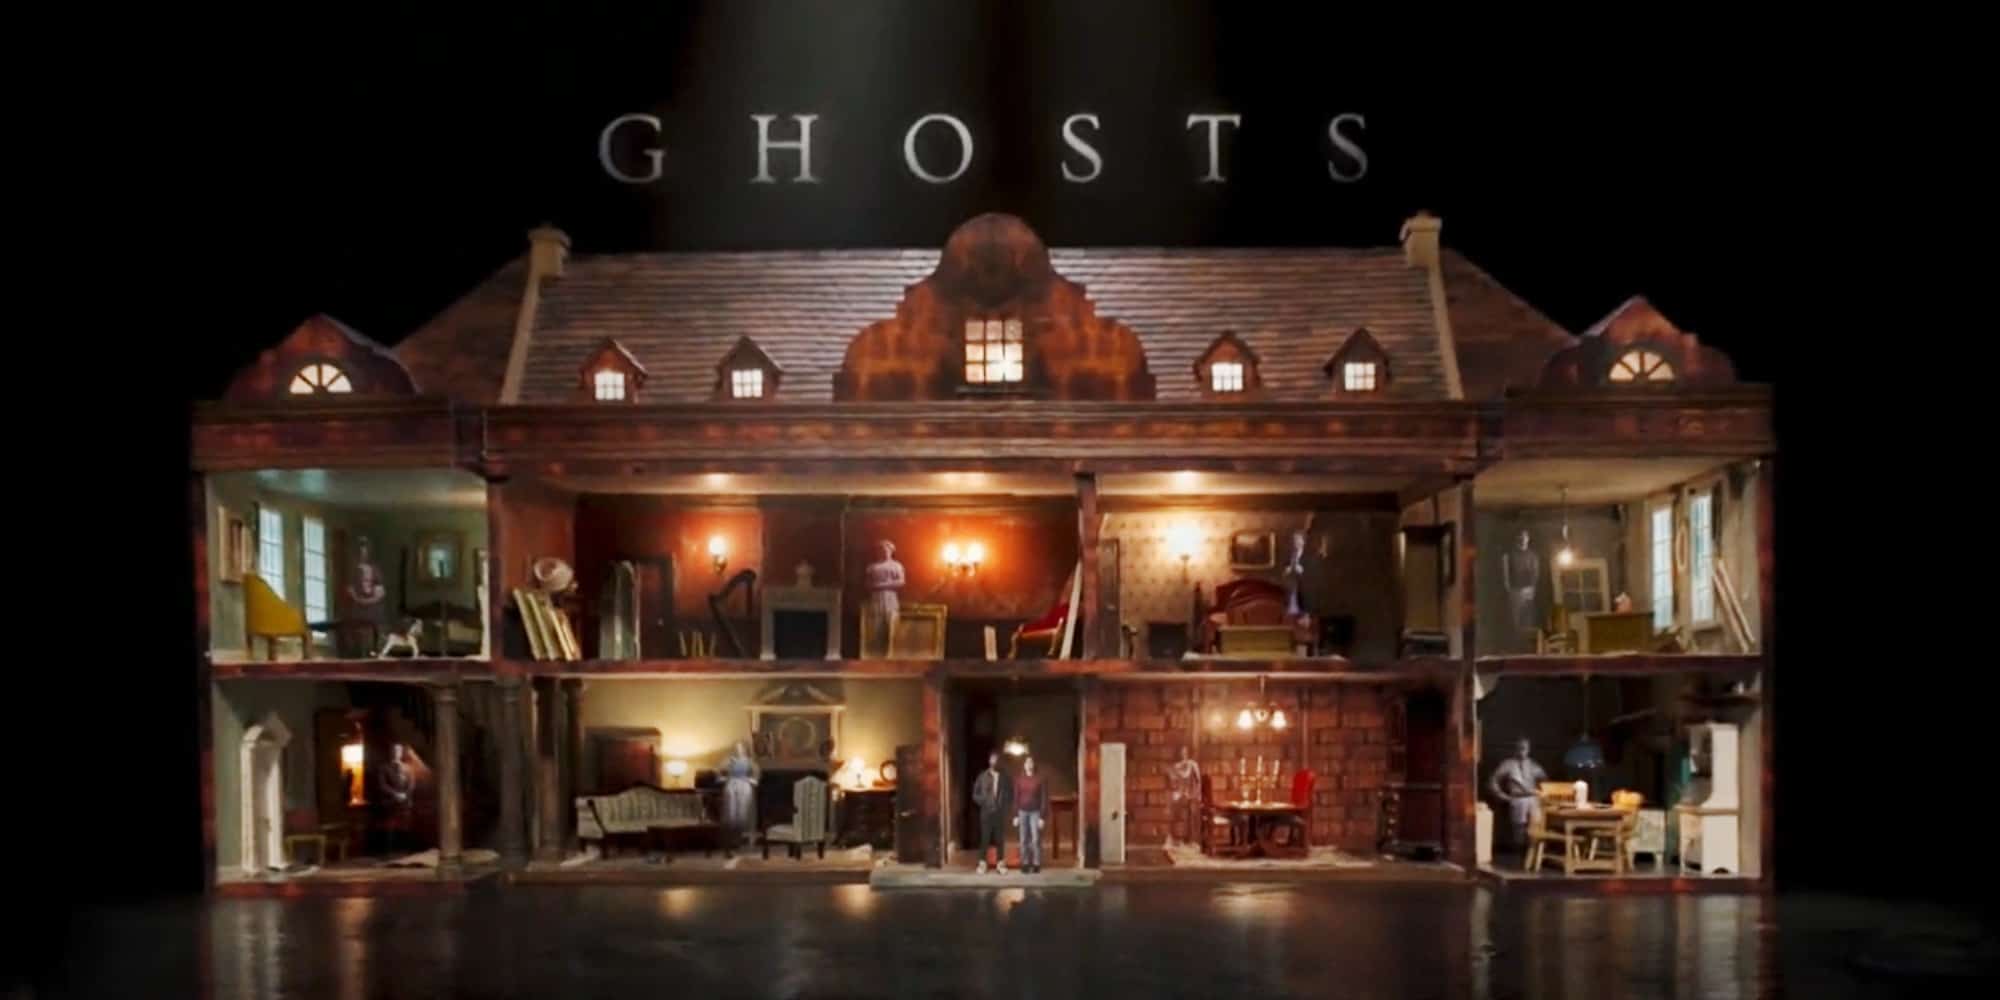 Ghosts TV Show Filming Locations